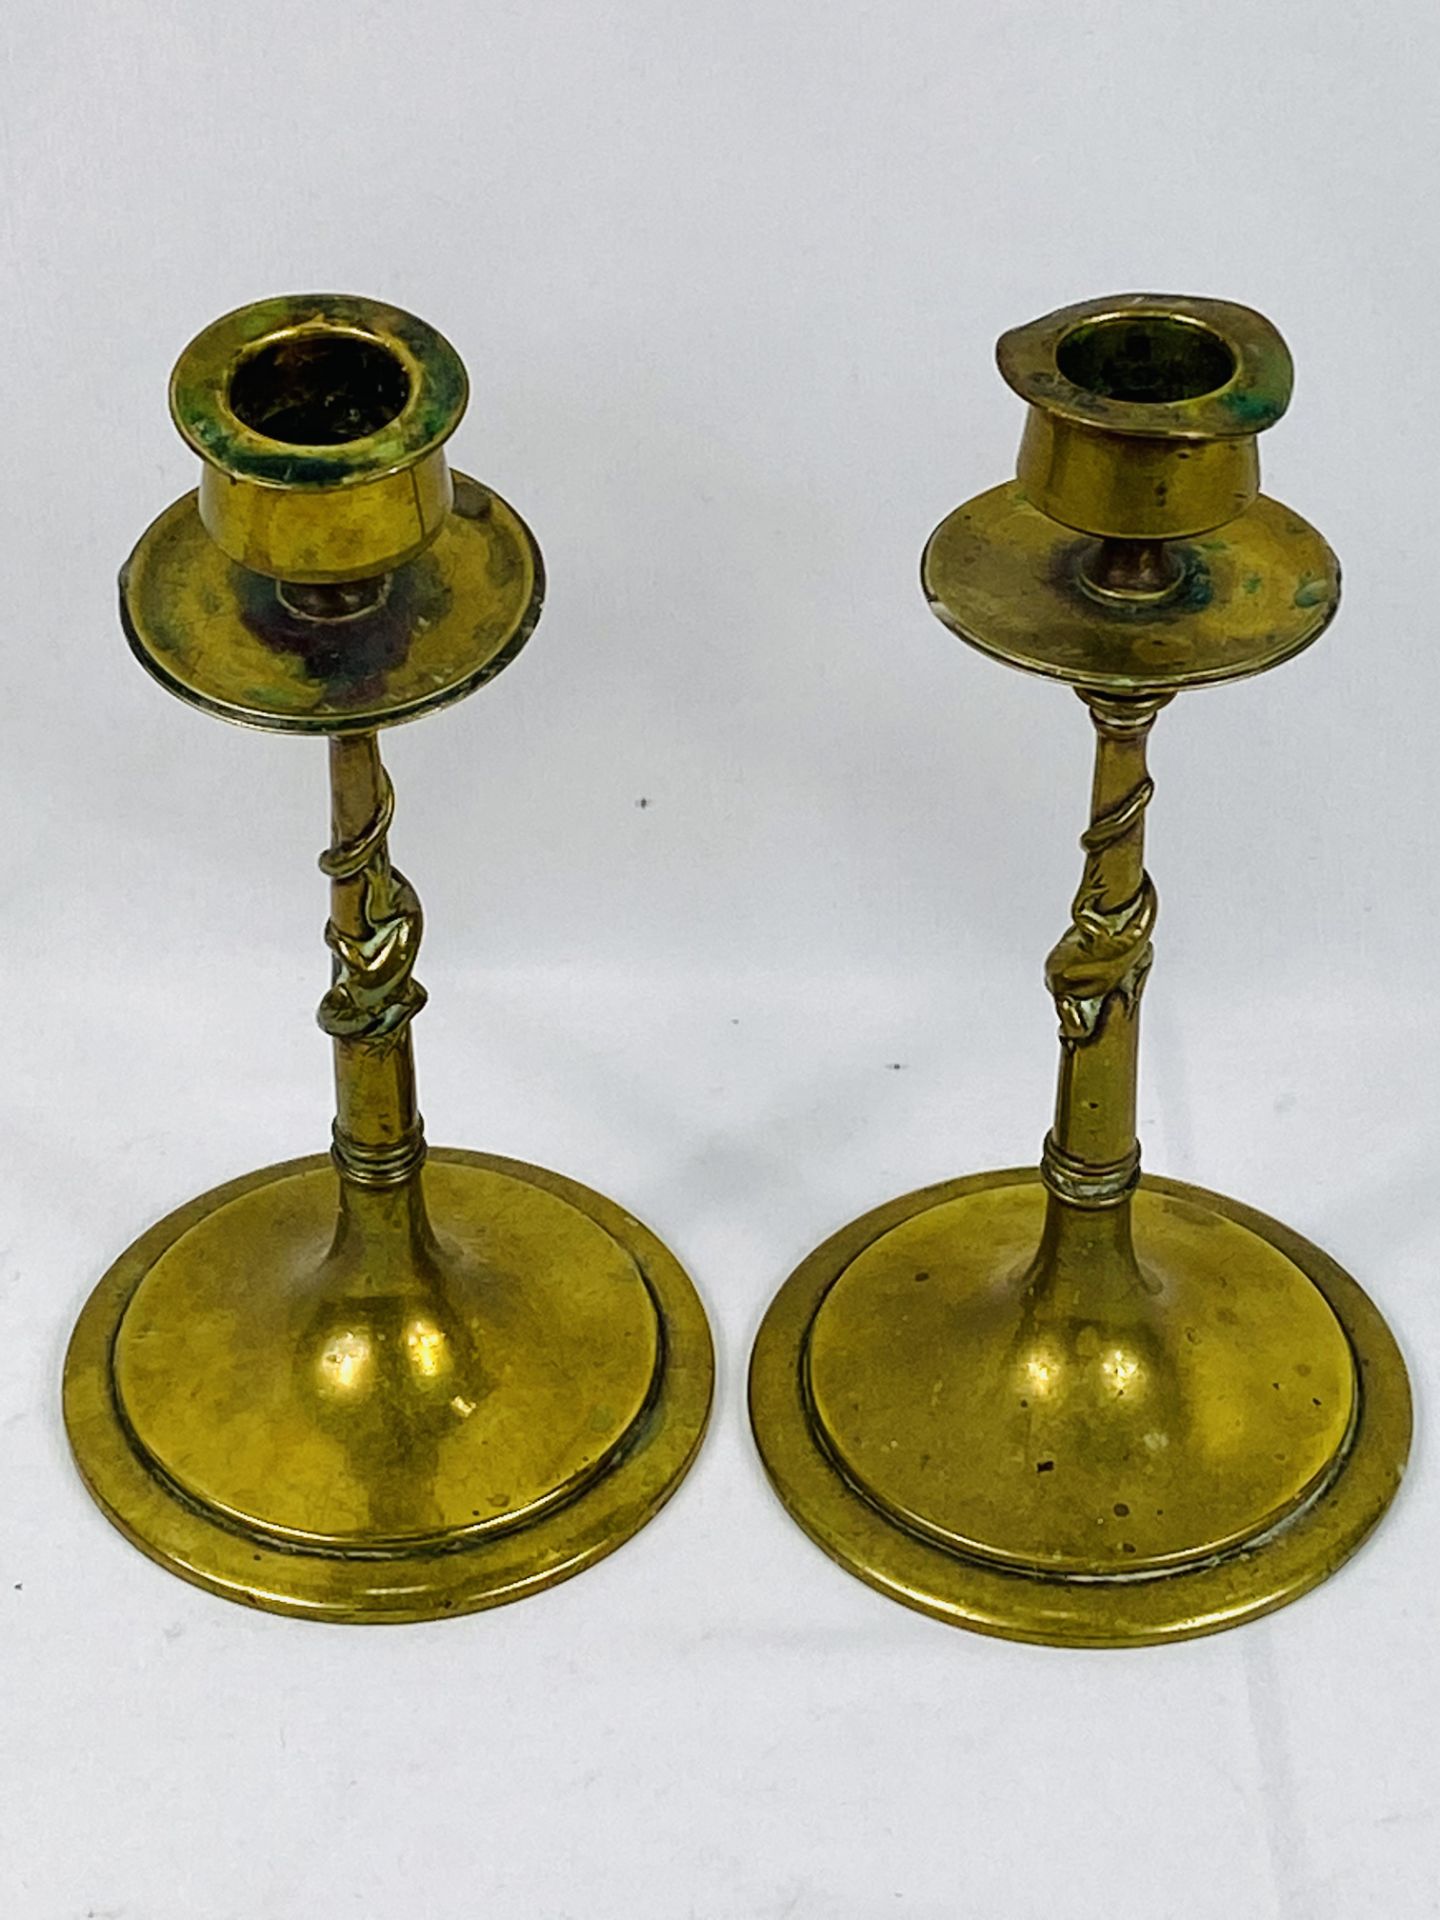 Pair of brass candlesticks - Image 3 of 3